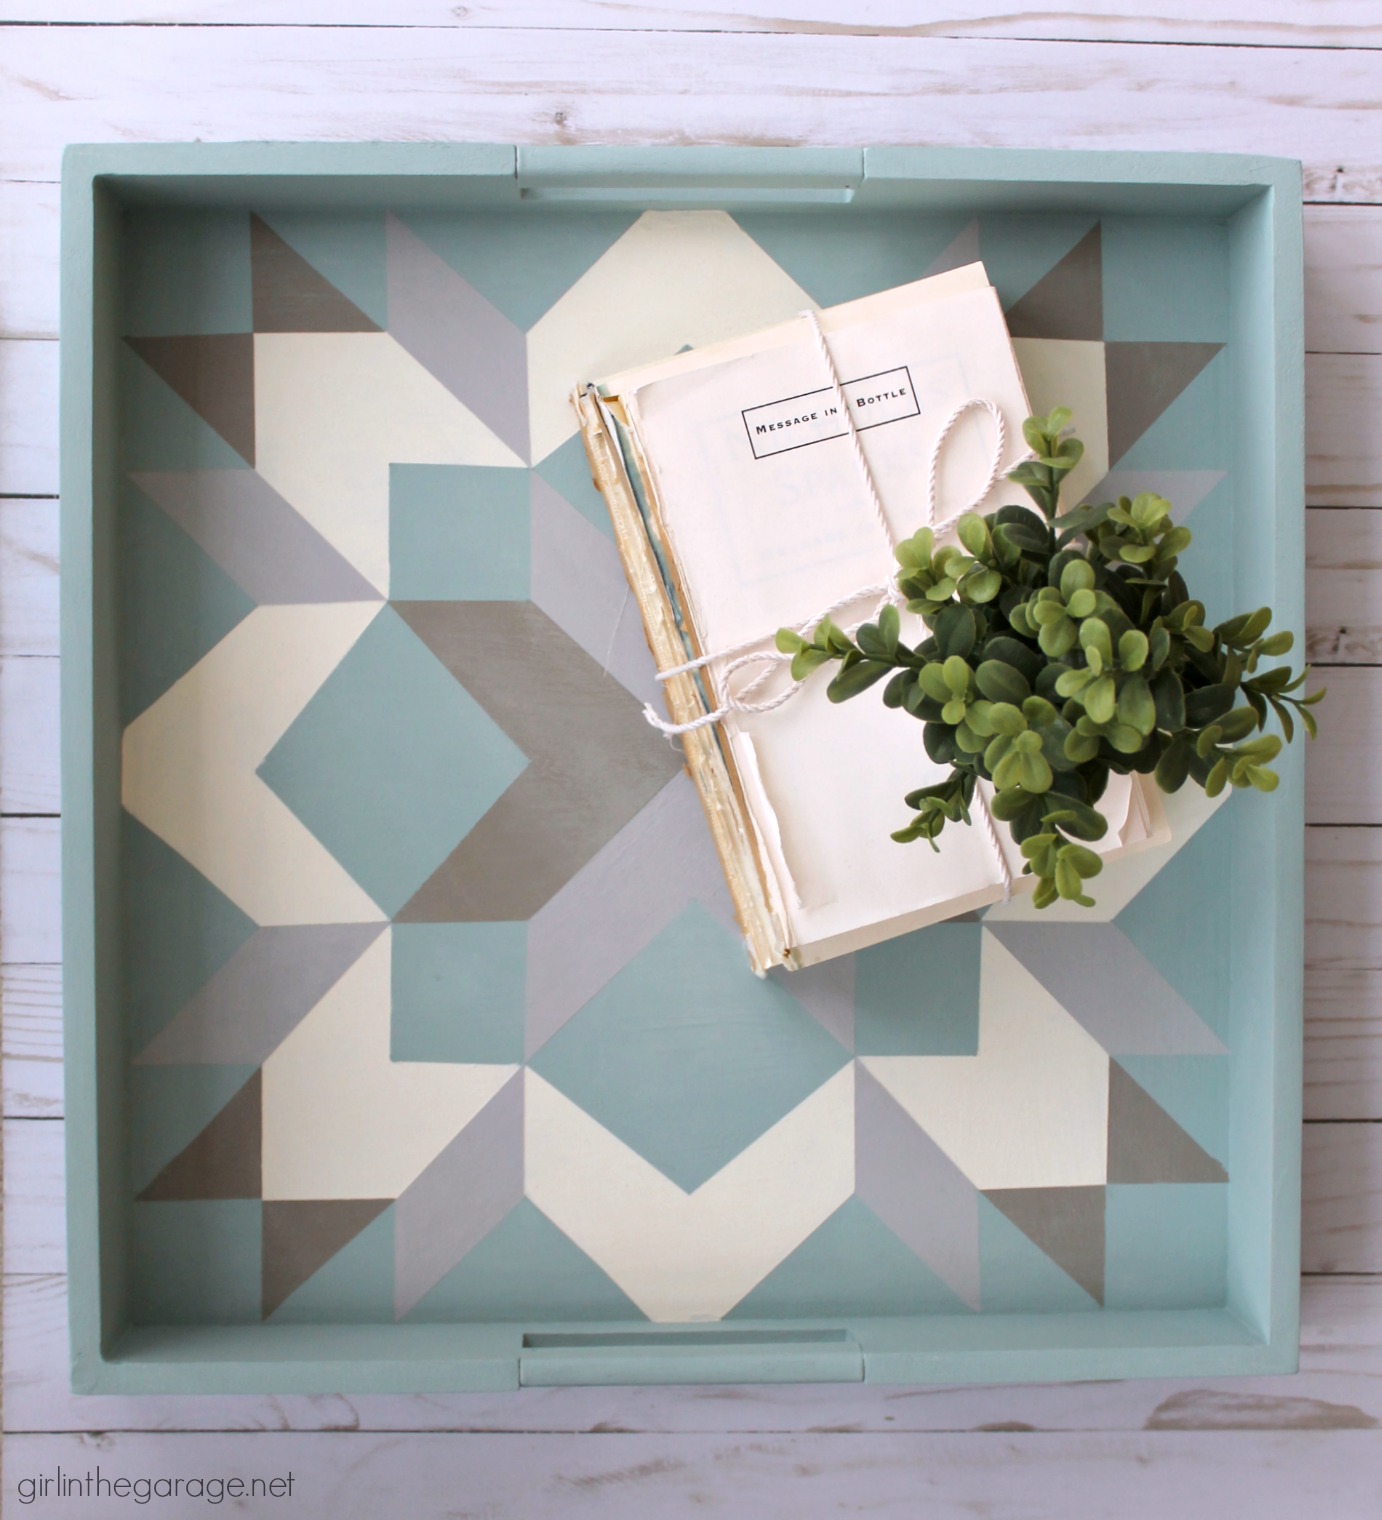 How to paint a barn quilt on a thrifted tray for a beautiful art piece. Step by step DIY tutorial by Girl in the Garage.